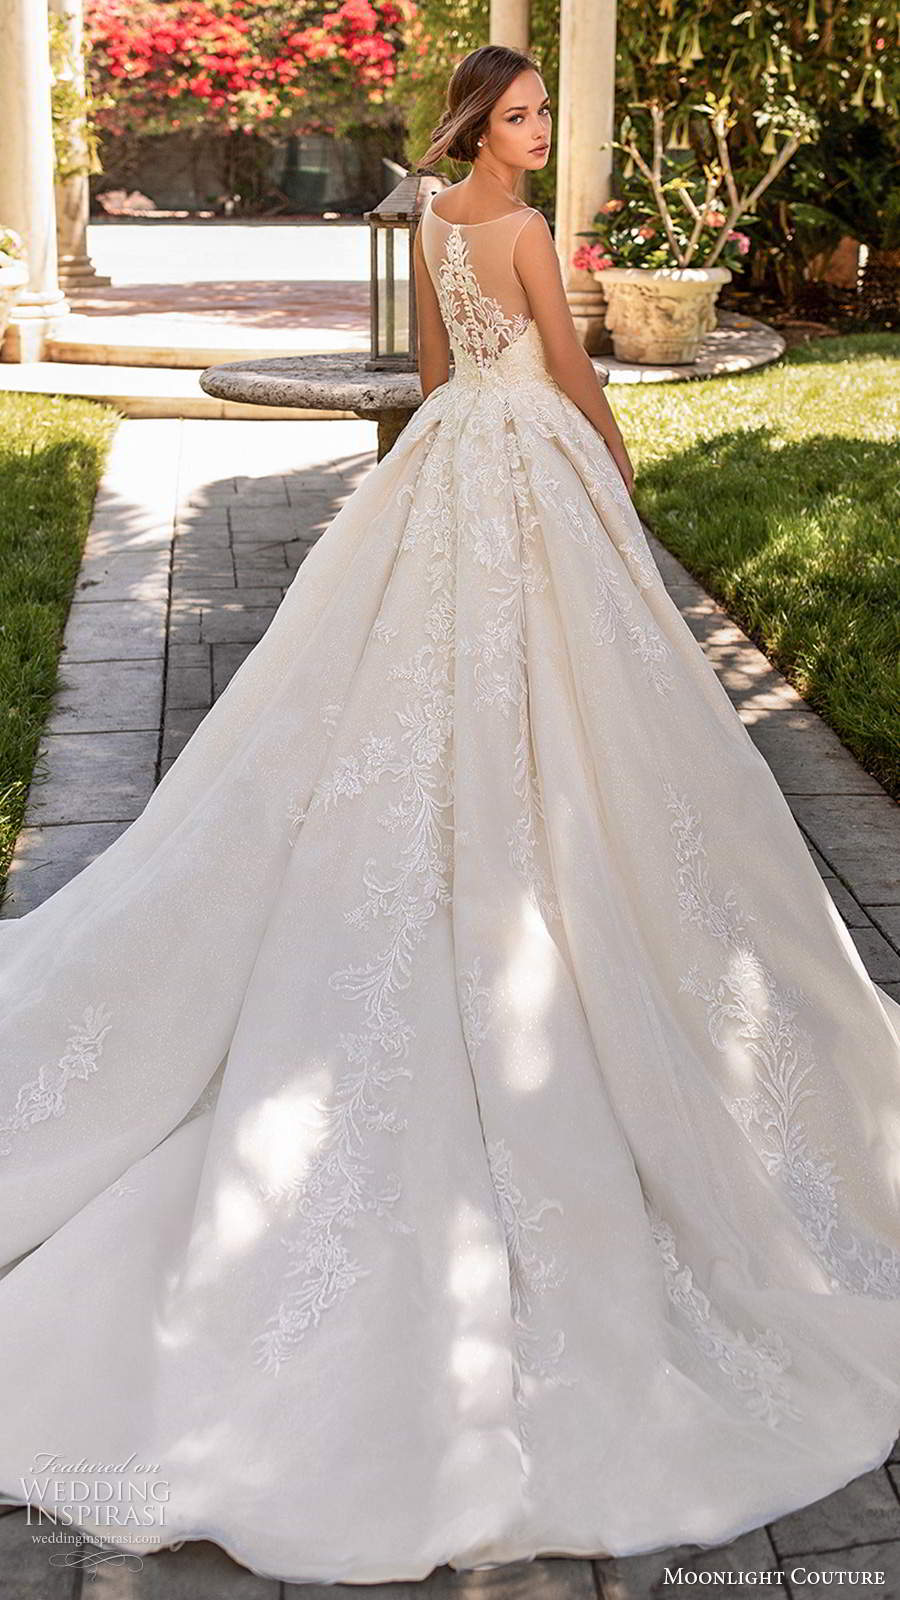 moonlight couture spring 2020 bridal sleeveless illusion bateau neck sweetheart neckline heavily embellished bodice a line ball gown wedding dress illusion back chapel train (6) bv